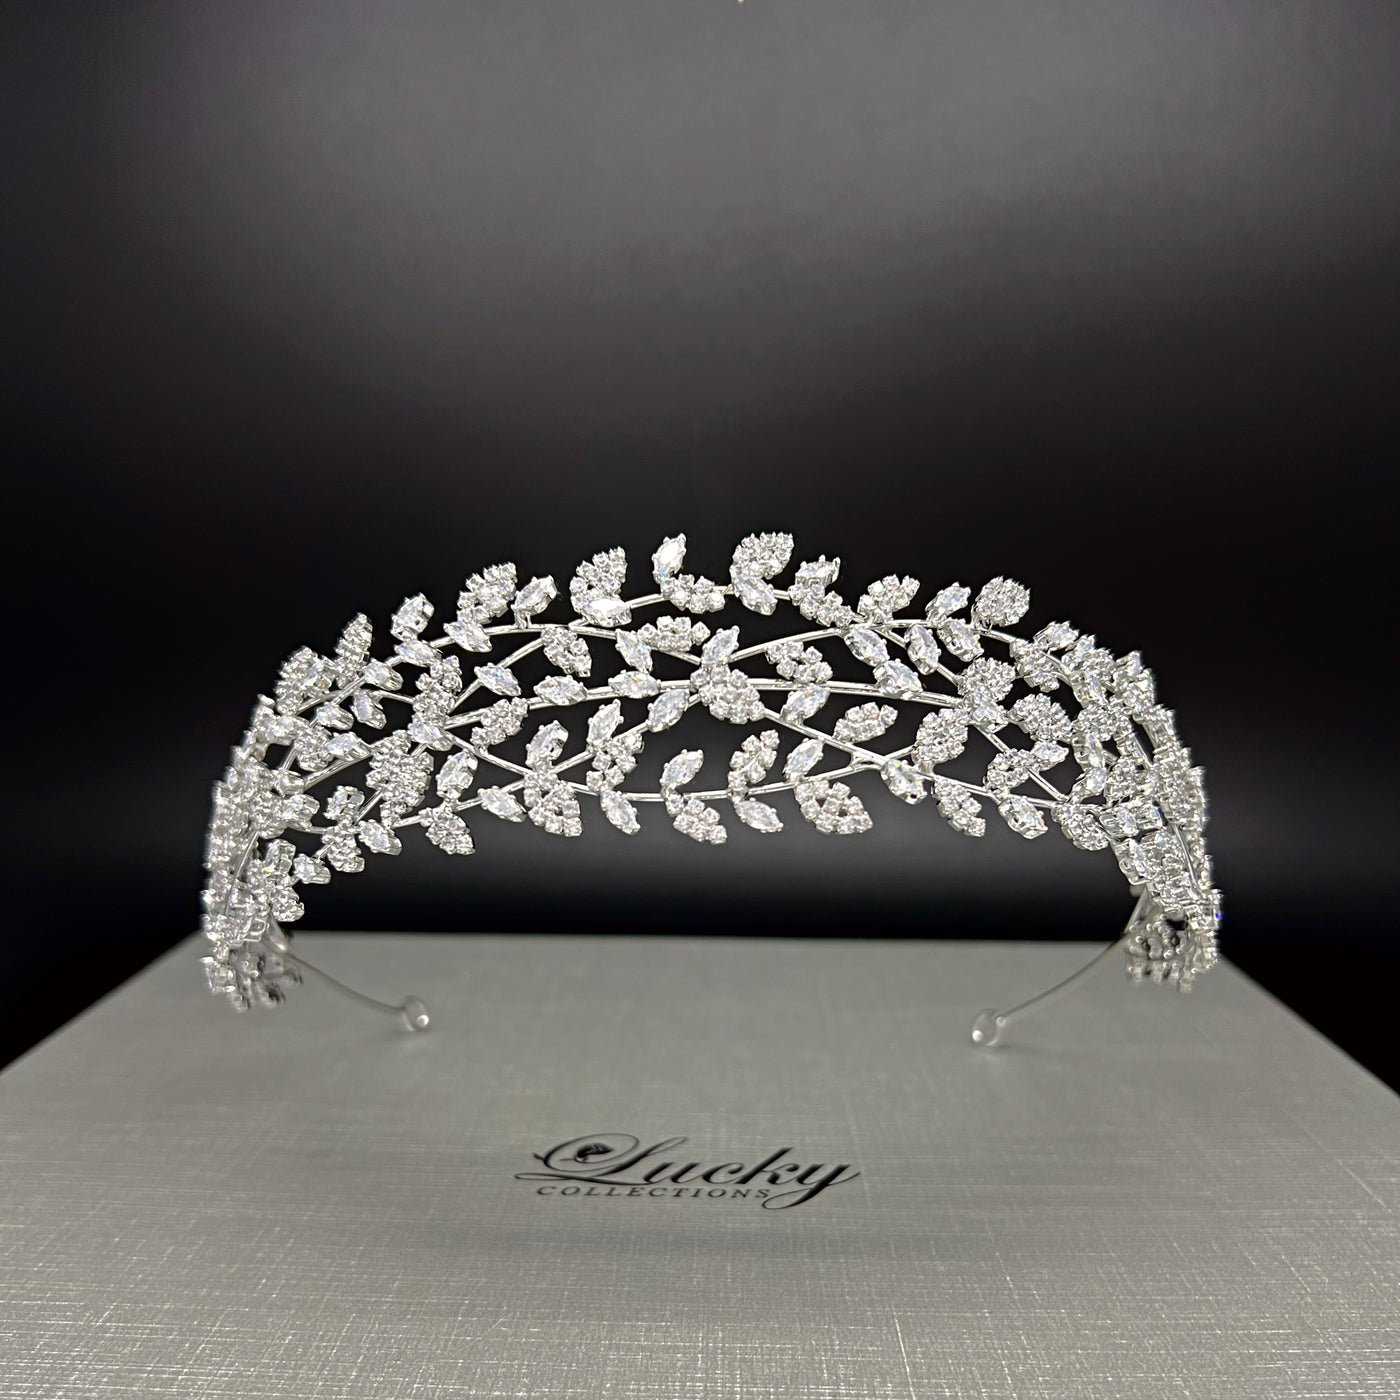 Modernistic Cubic Zirconia Bridal Headband keeps your hair back while you focus on your joyous occasion.